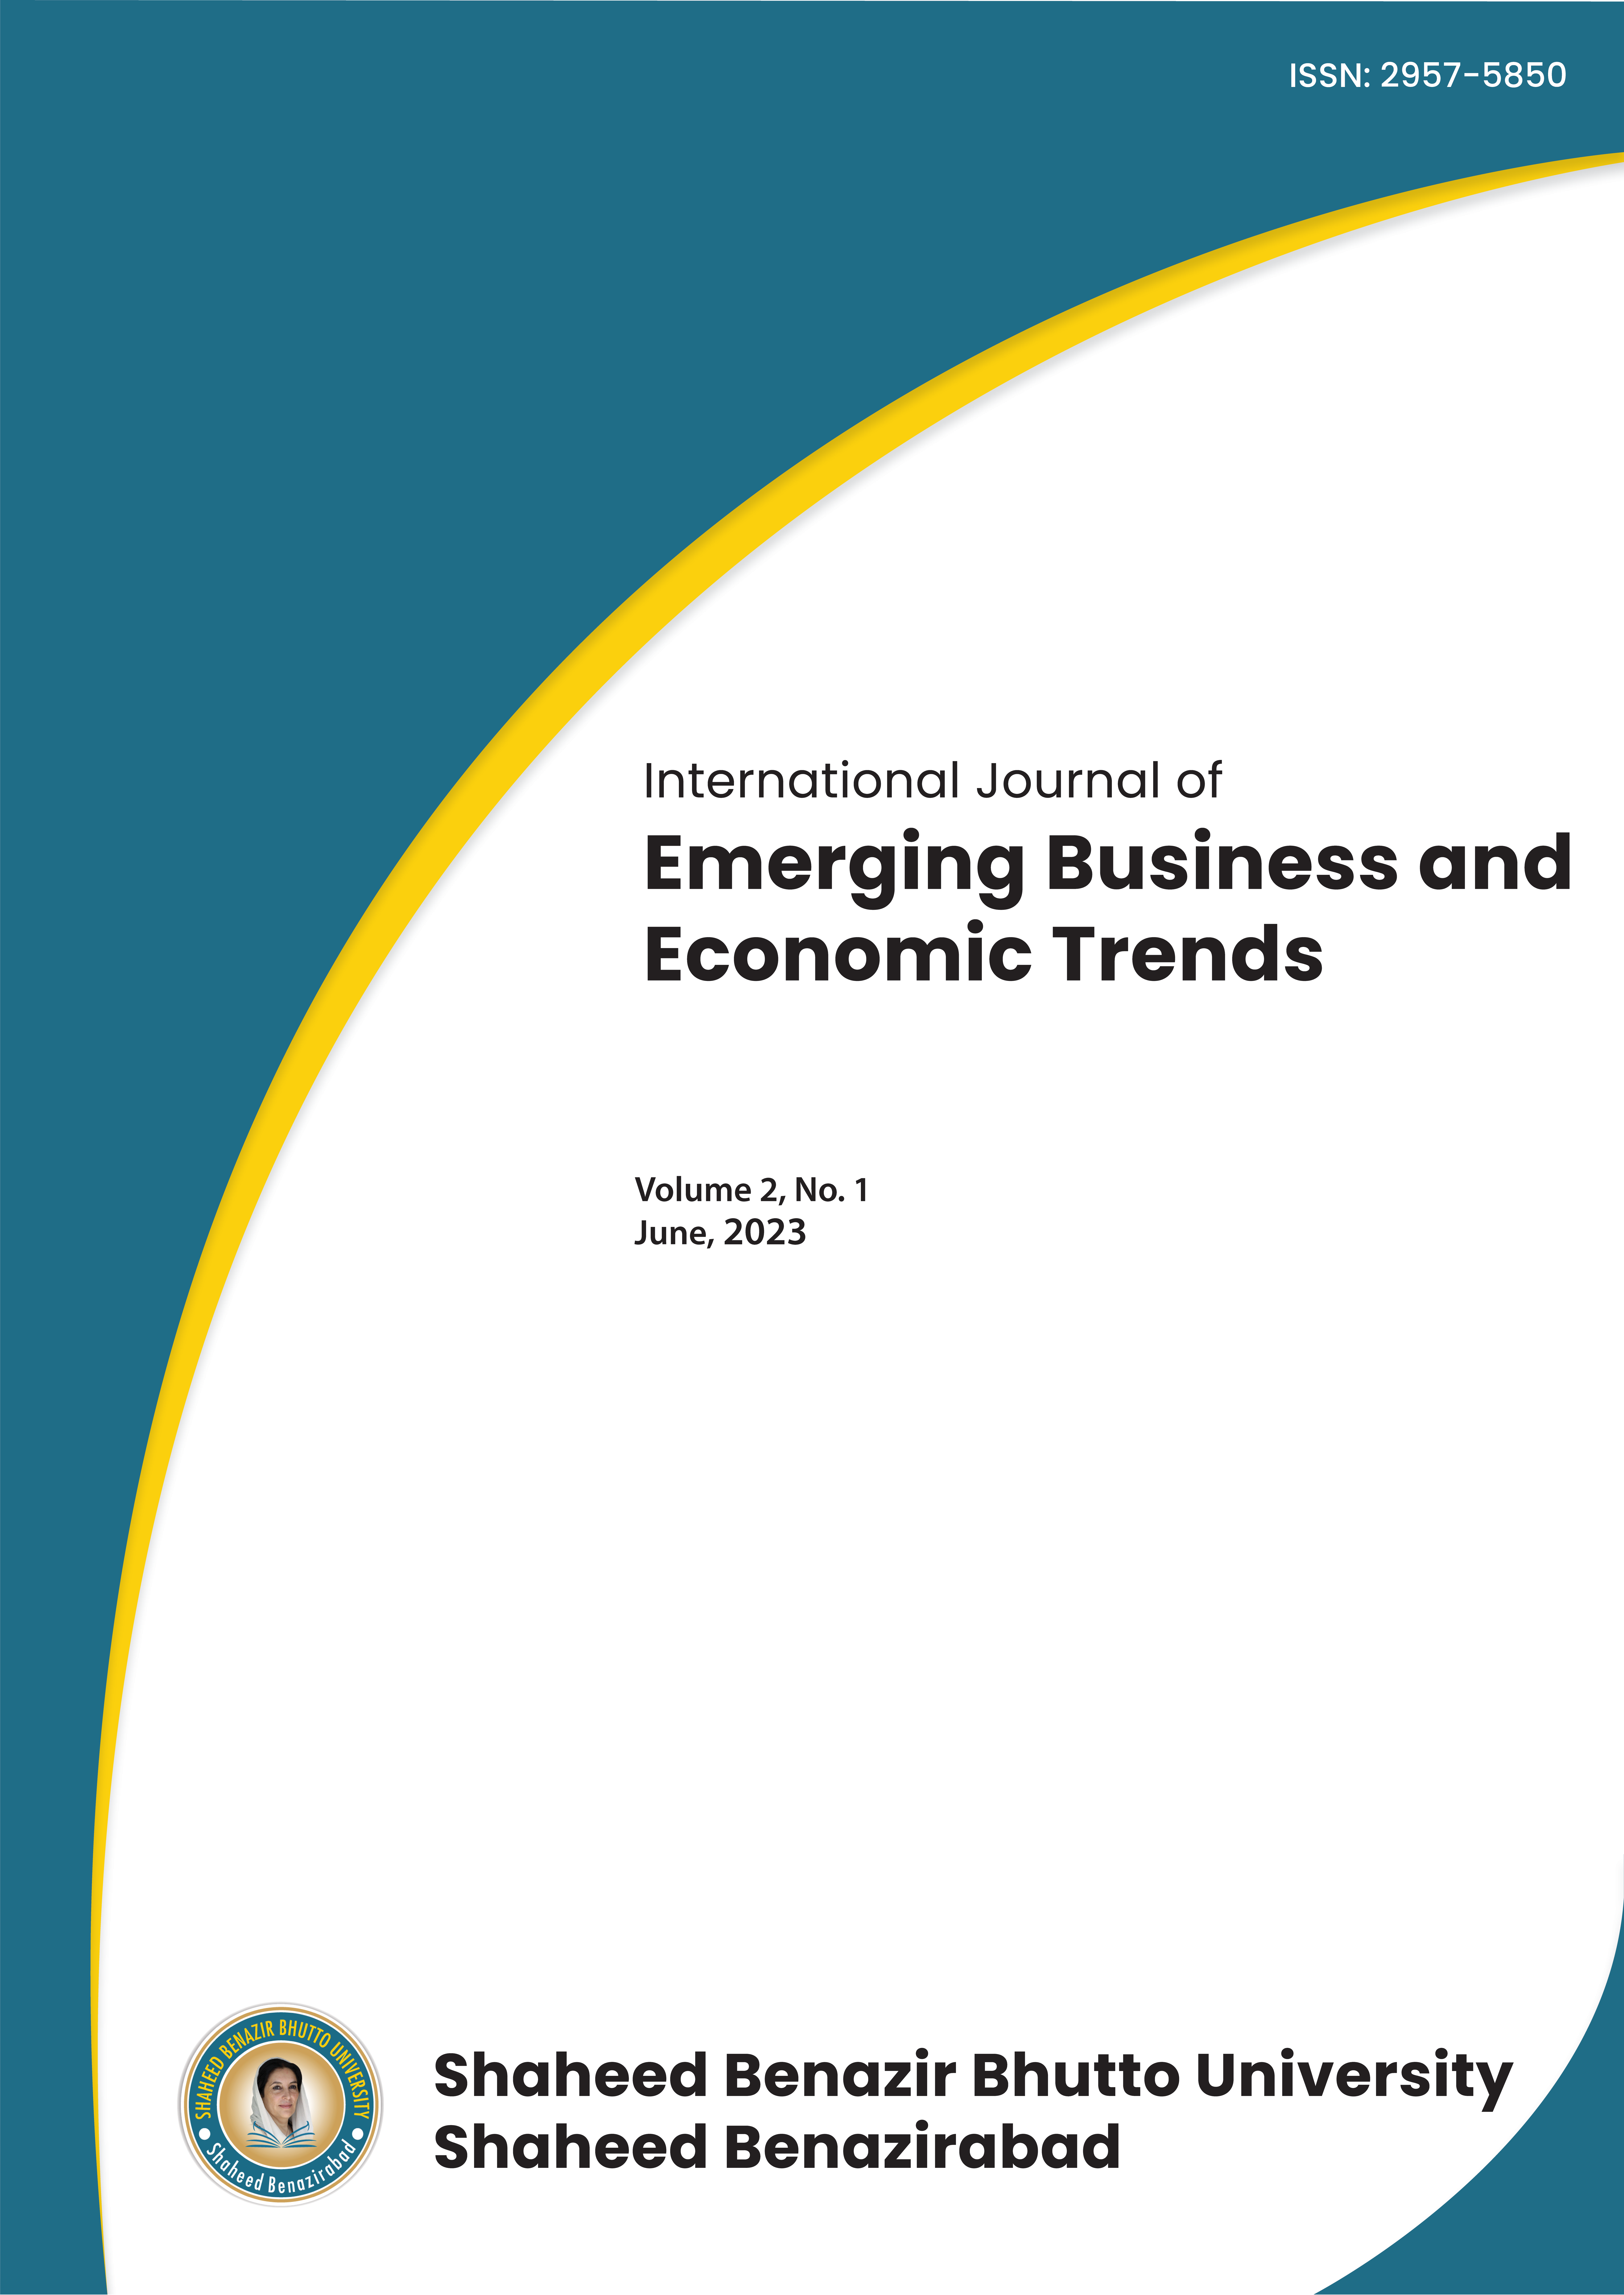 					View Vol. 2 No. 1 (2023): International Journal of Emerging Business and Economic Trends
				